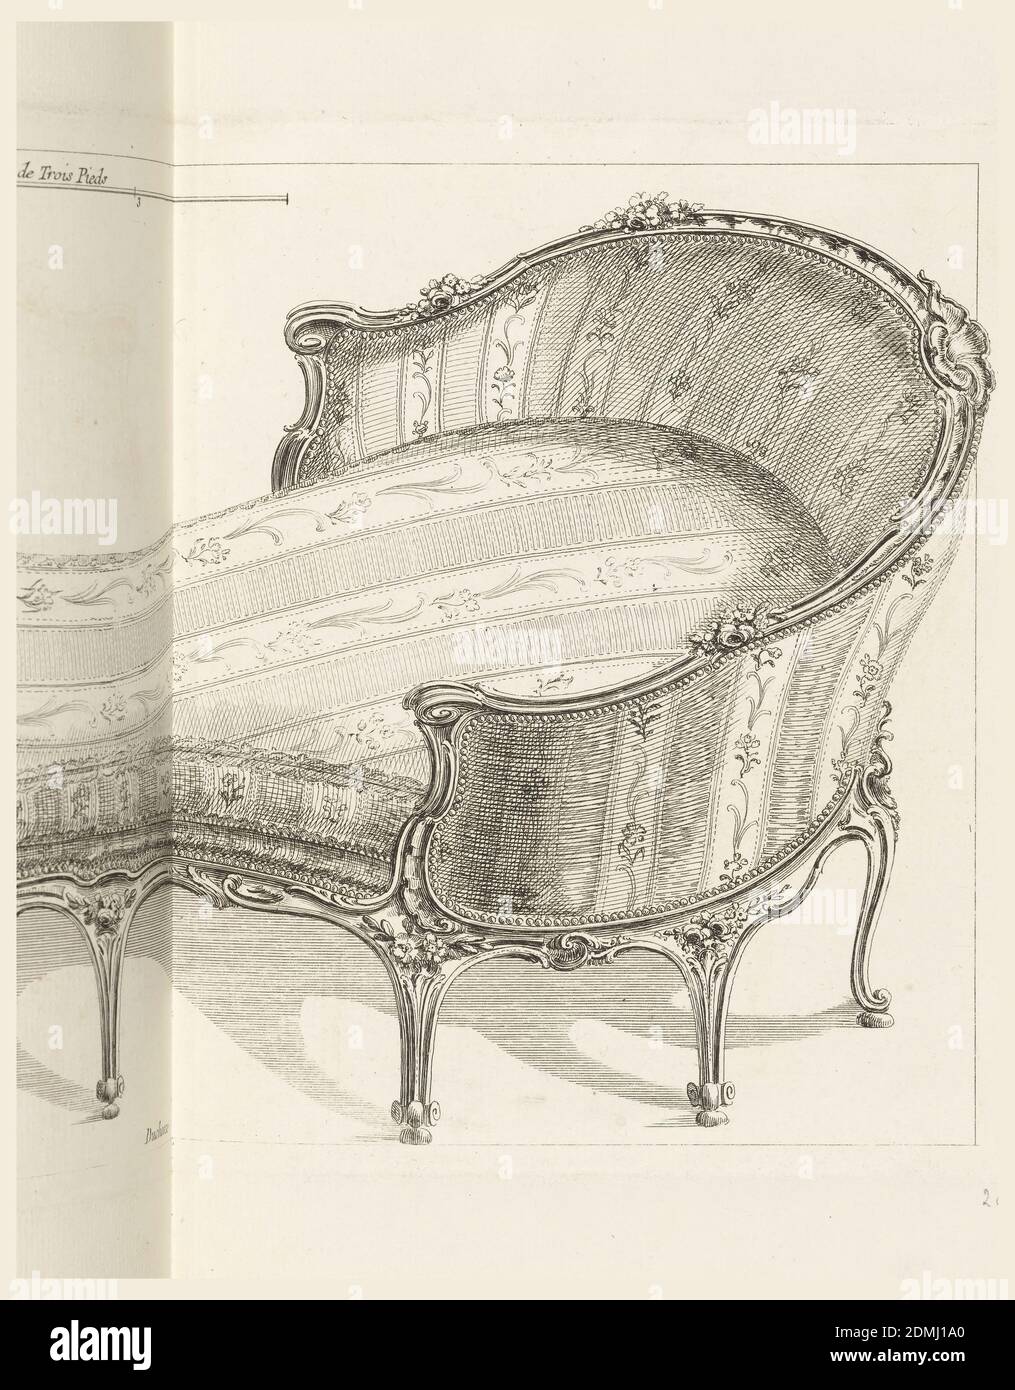 Duchesse (No. 4), from Recueil de différents Muebles garniers Comme Fauteuils (Liard's 'Suites'), Matthew Liard, English, ca. 1736–1782, Etching on cream laid paper, Duchesse cushion decorated with rinceaux; arms and back in floral and curved Rococo motif., England, 1762, furniture, Print Stock Photo